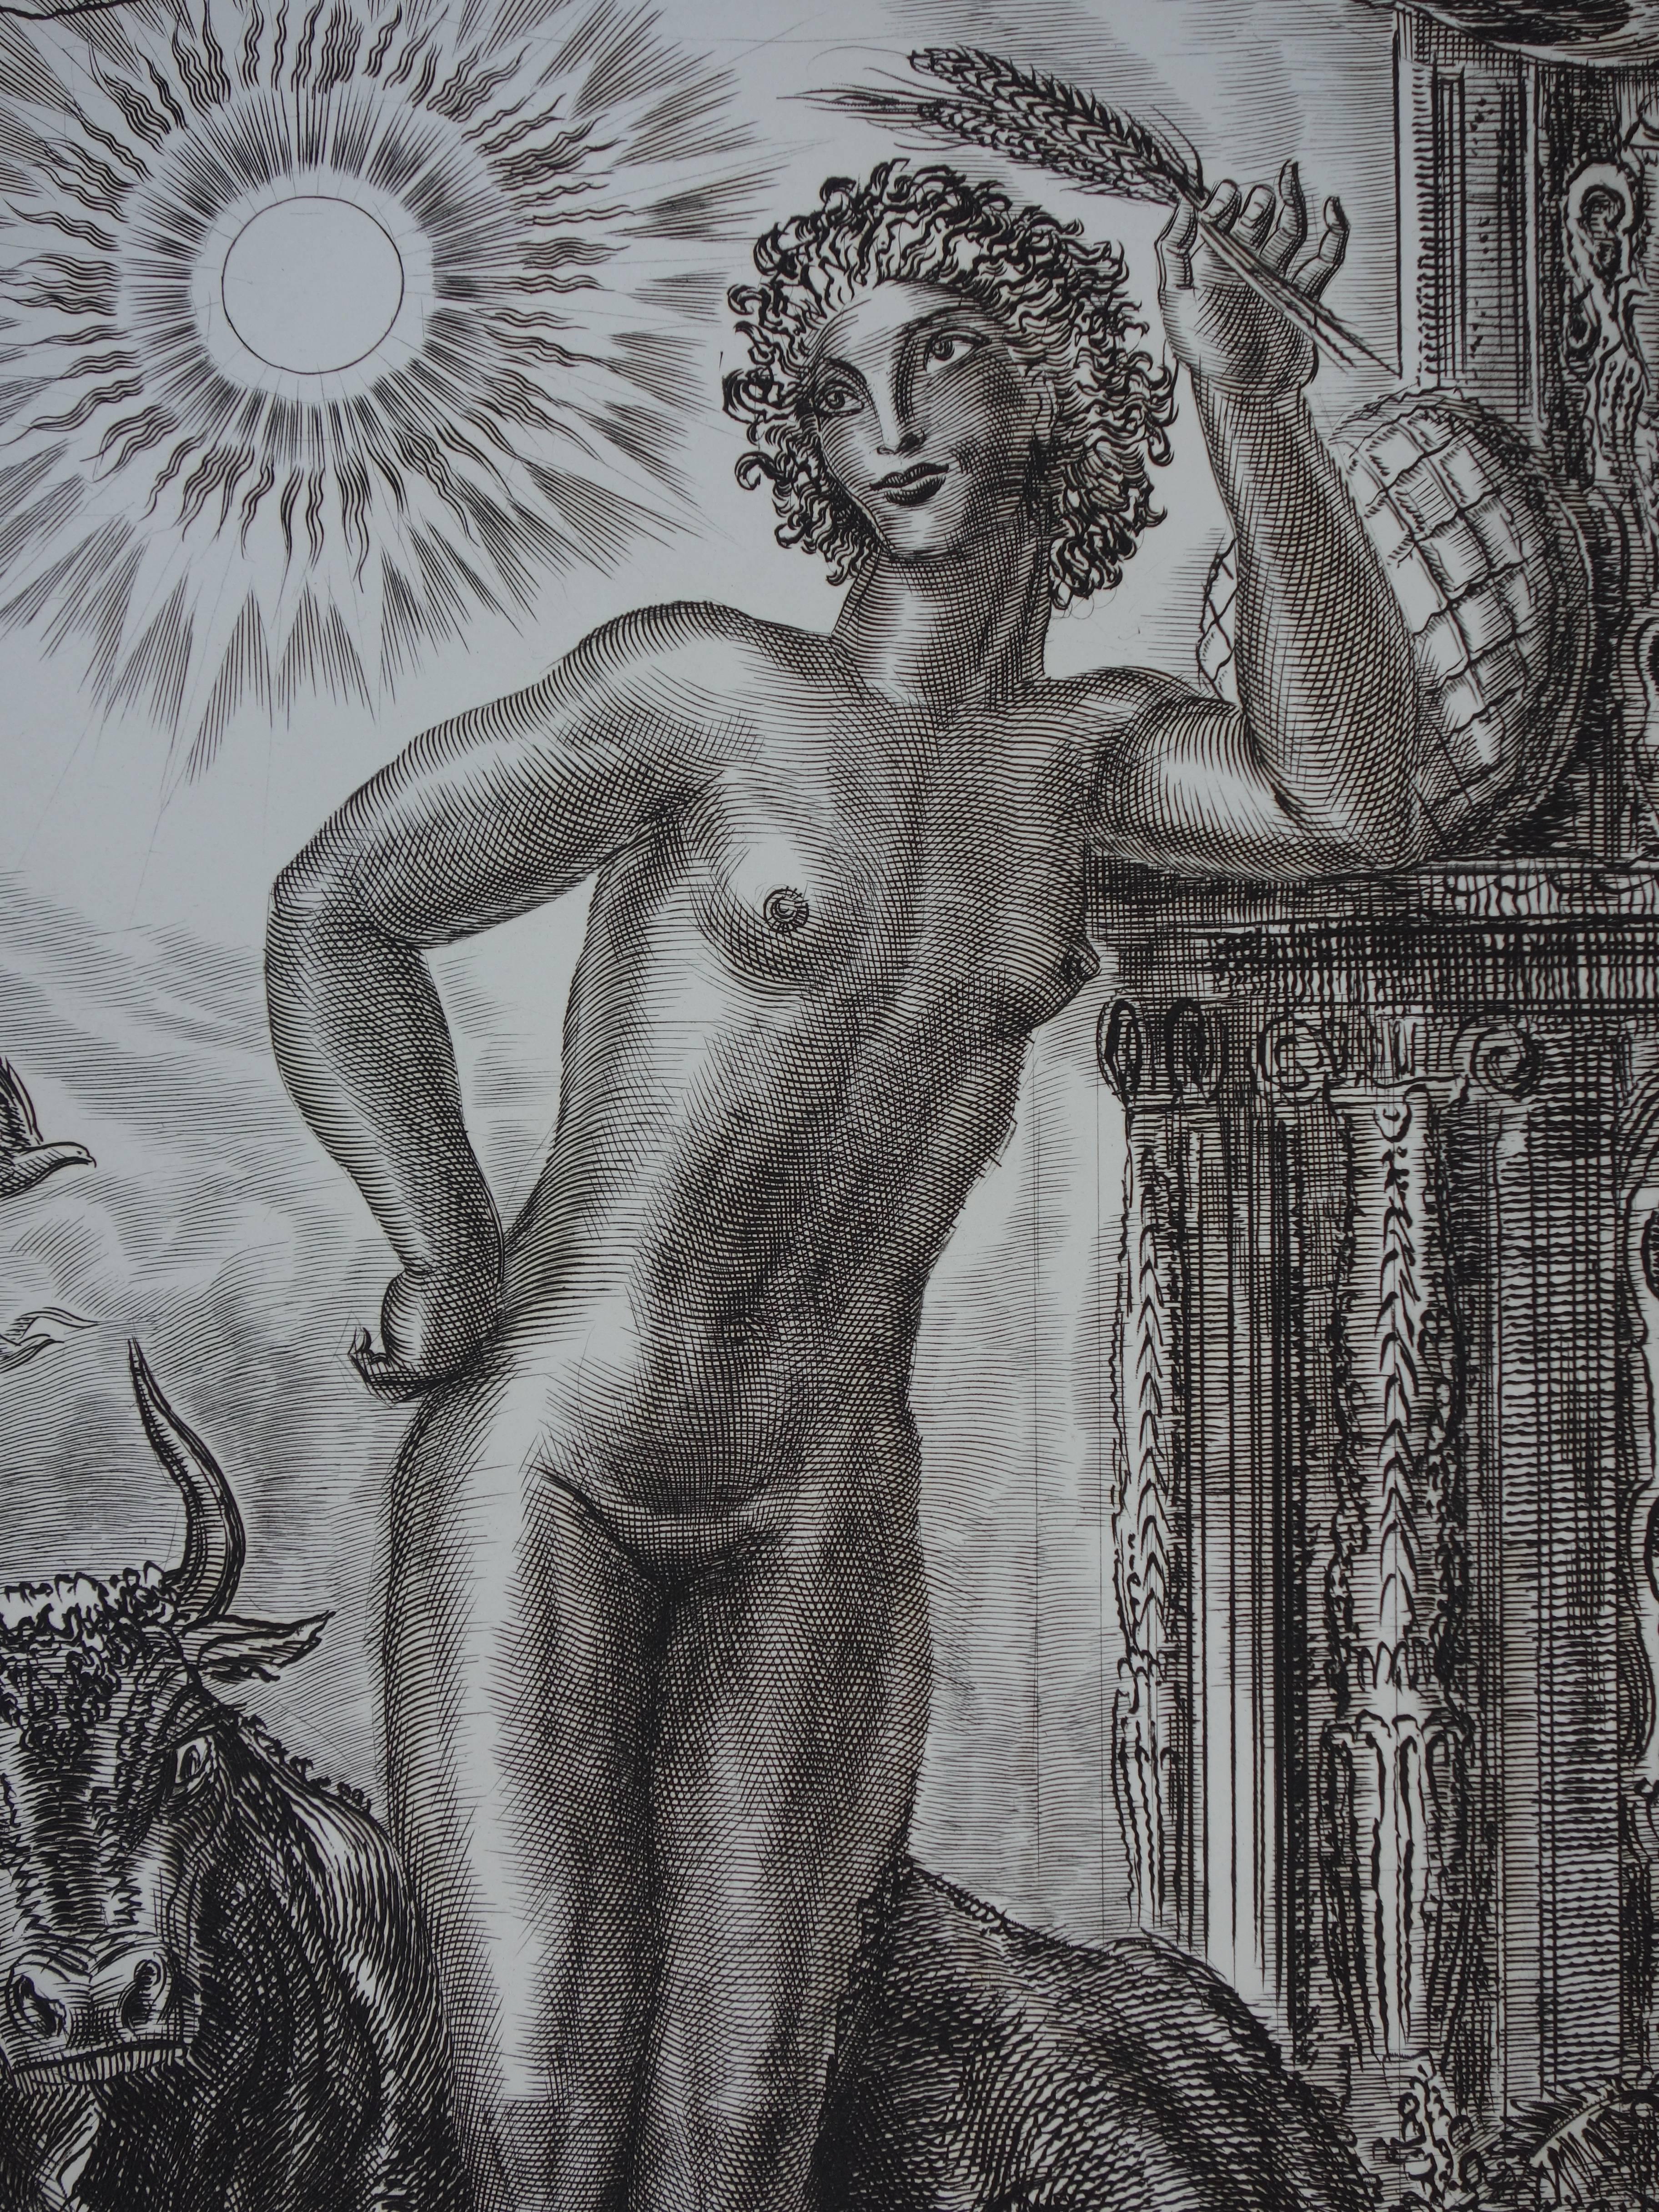 July : Rise of Nature - Original handsigned etching - Exceptional n° 1/100 - Gray Figurative Print by Albert Decaris